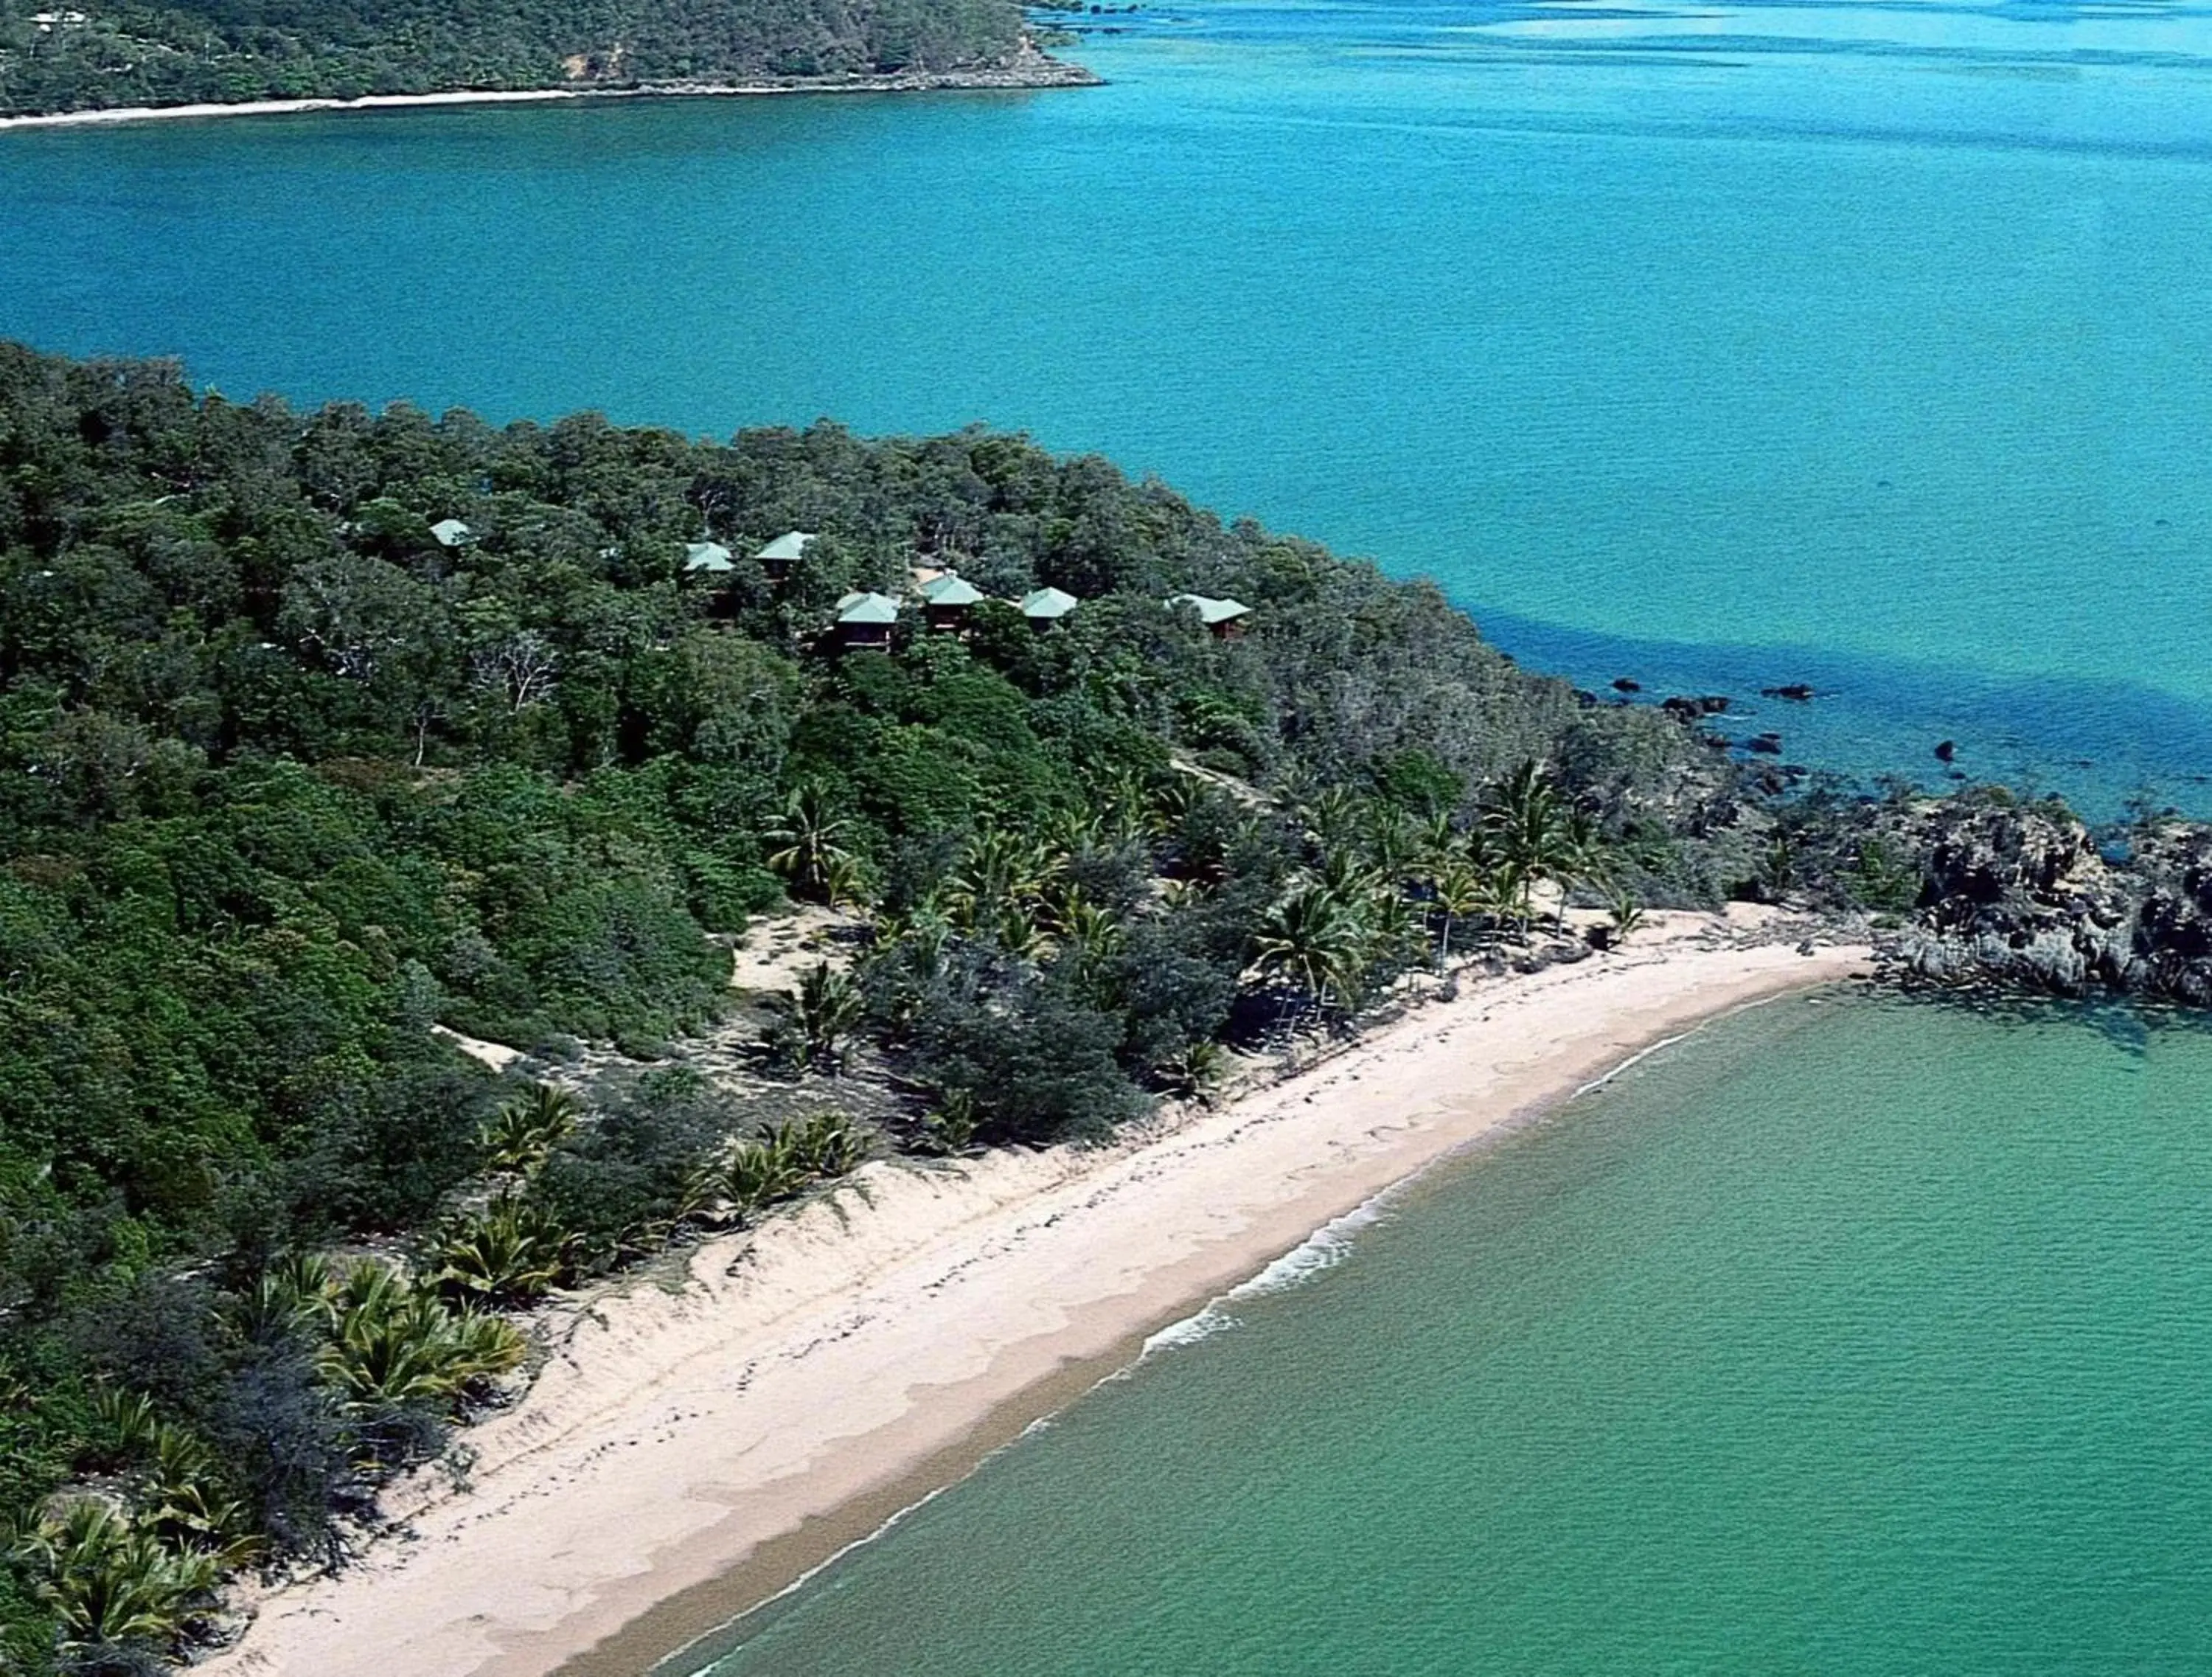 Day, Bird's-eye View in Thala Beach Nature Reserve